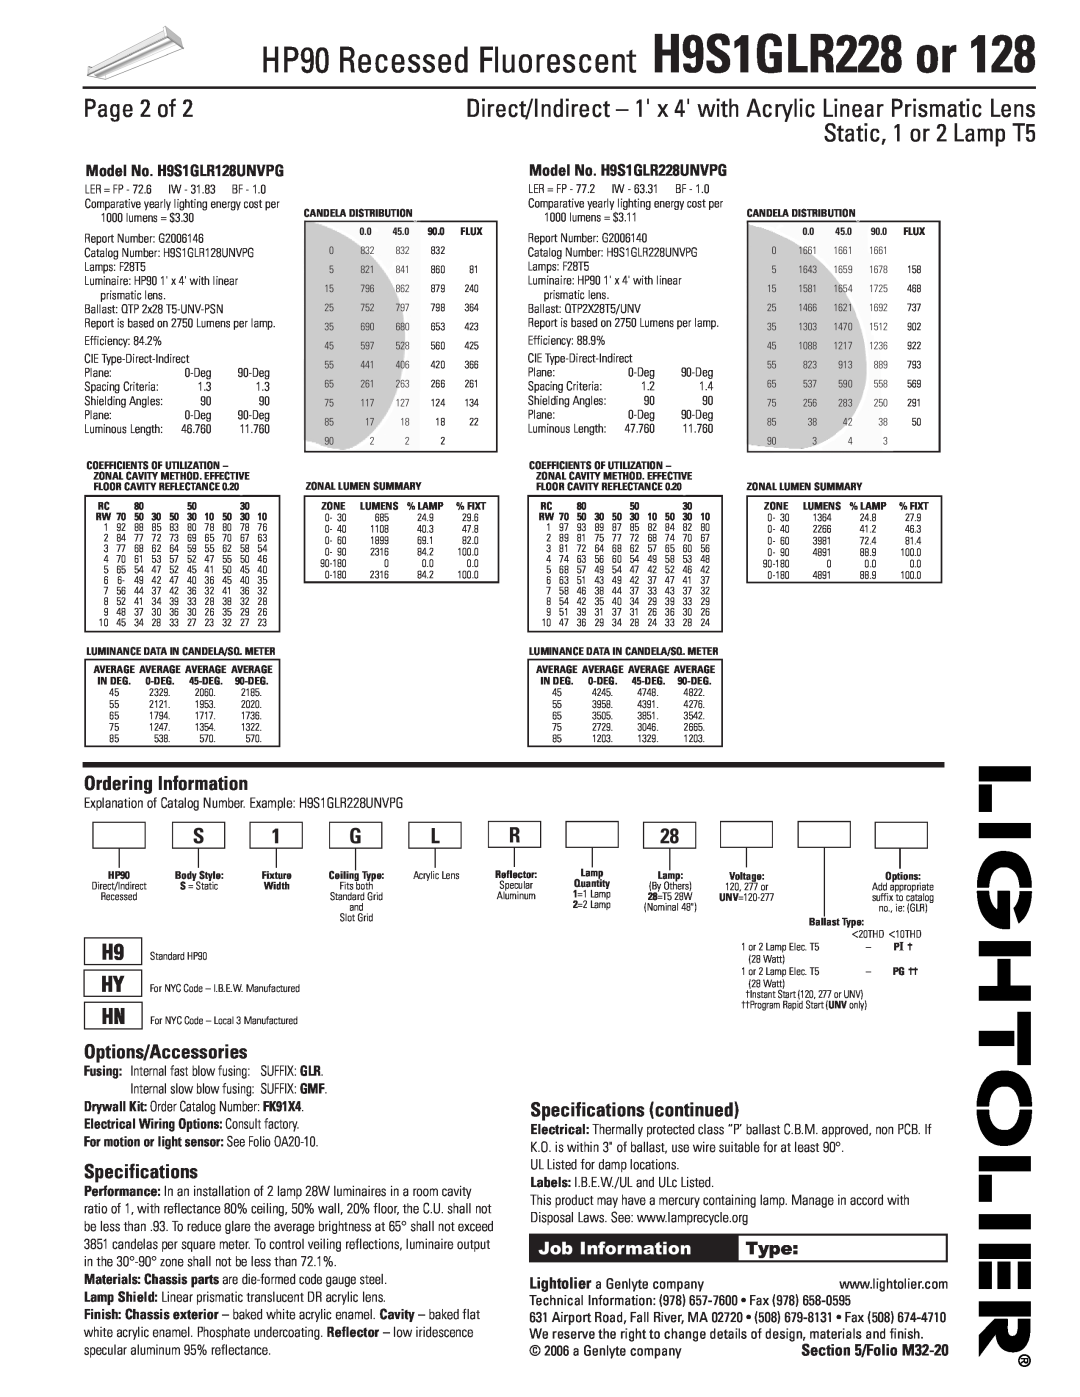 Lightolier H9S1GLR228 Page 2 of, Ordering Information, Options/Accessories, Specifications continued, Folio M32-20 